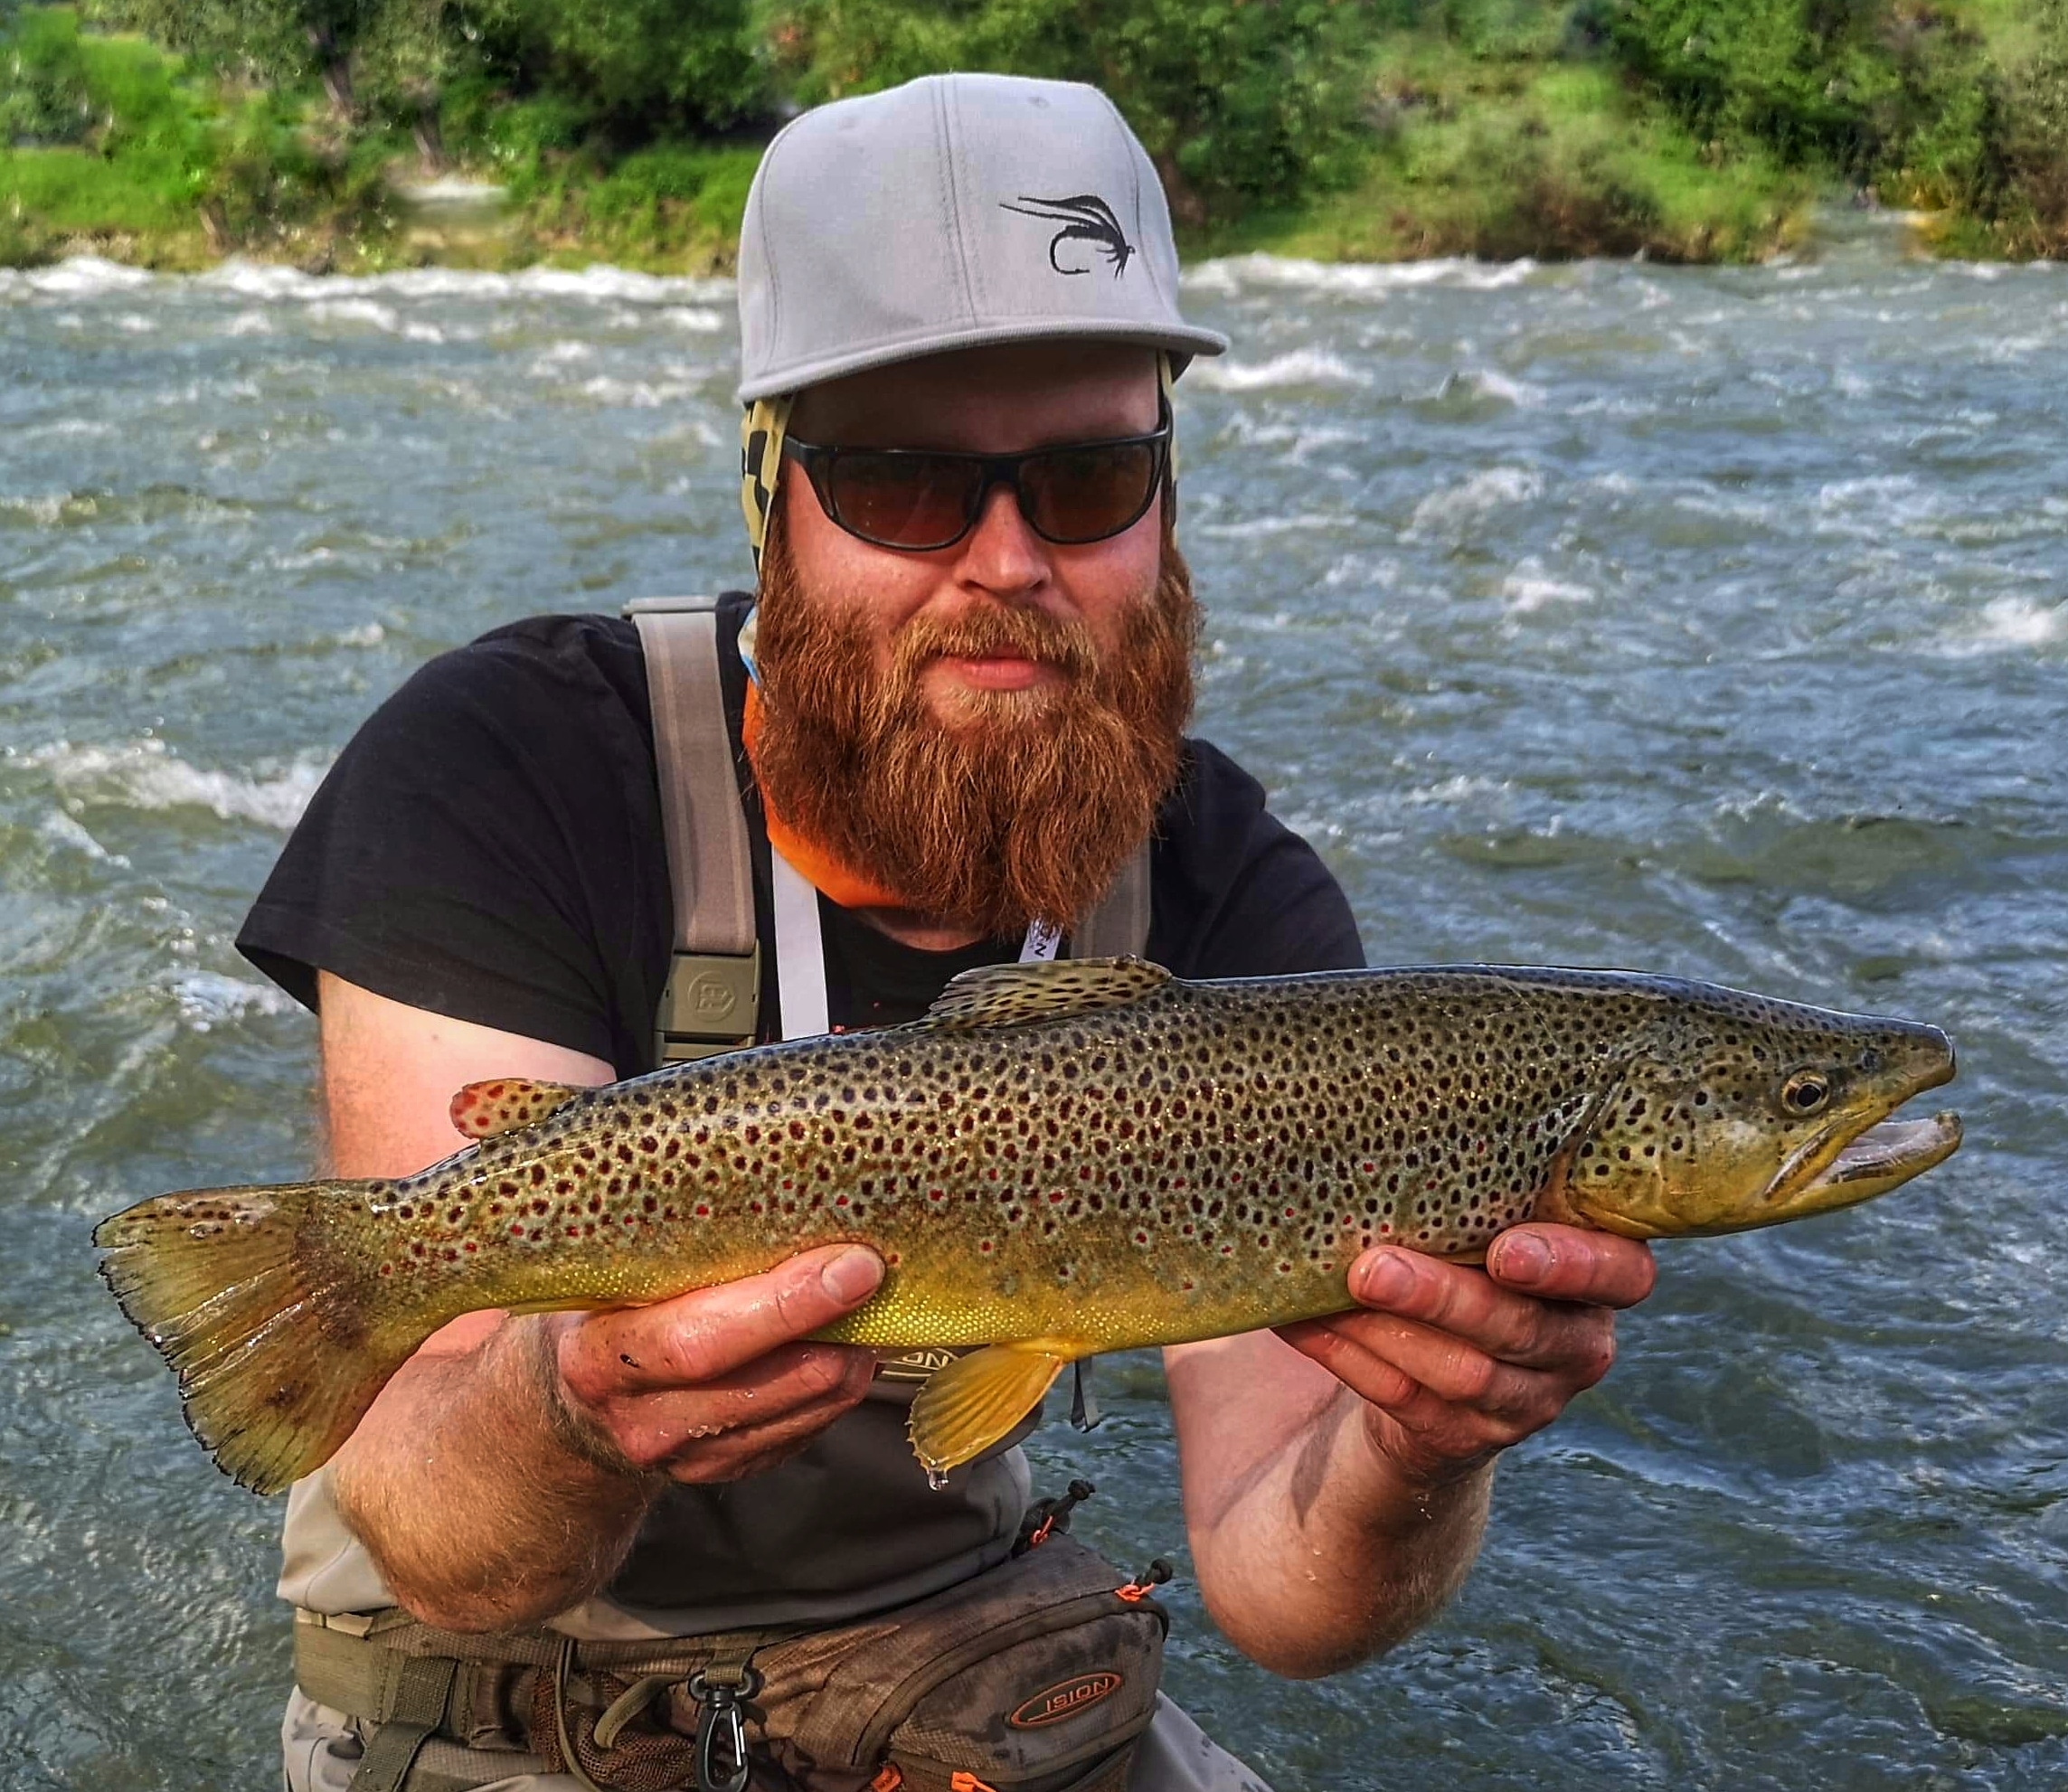 Fly Fishing Guide trophy fish - Fly Fishing in Poland